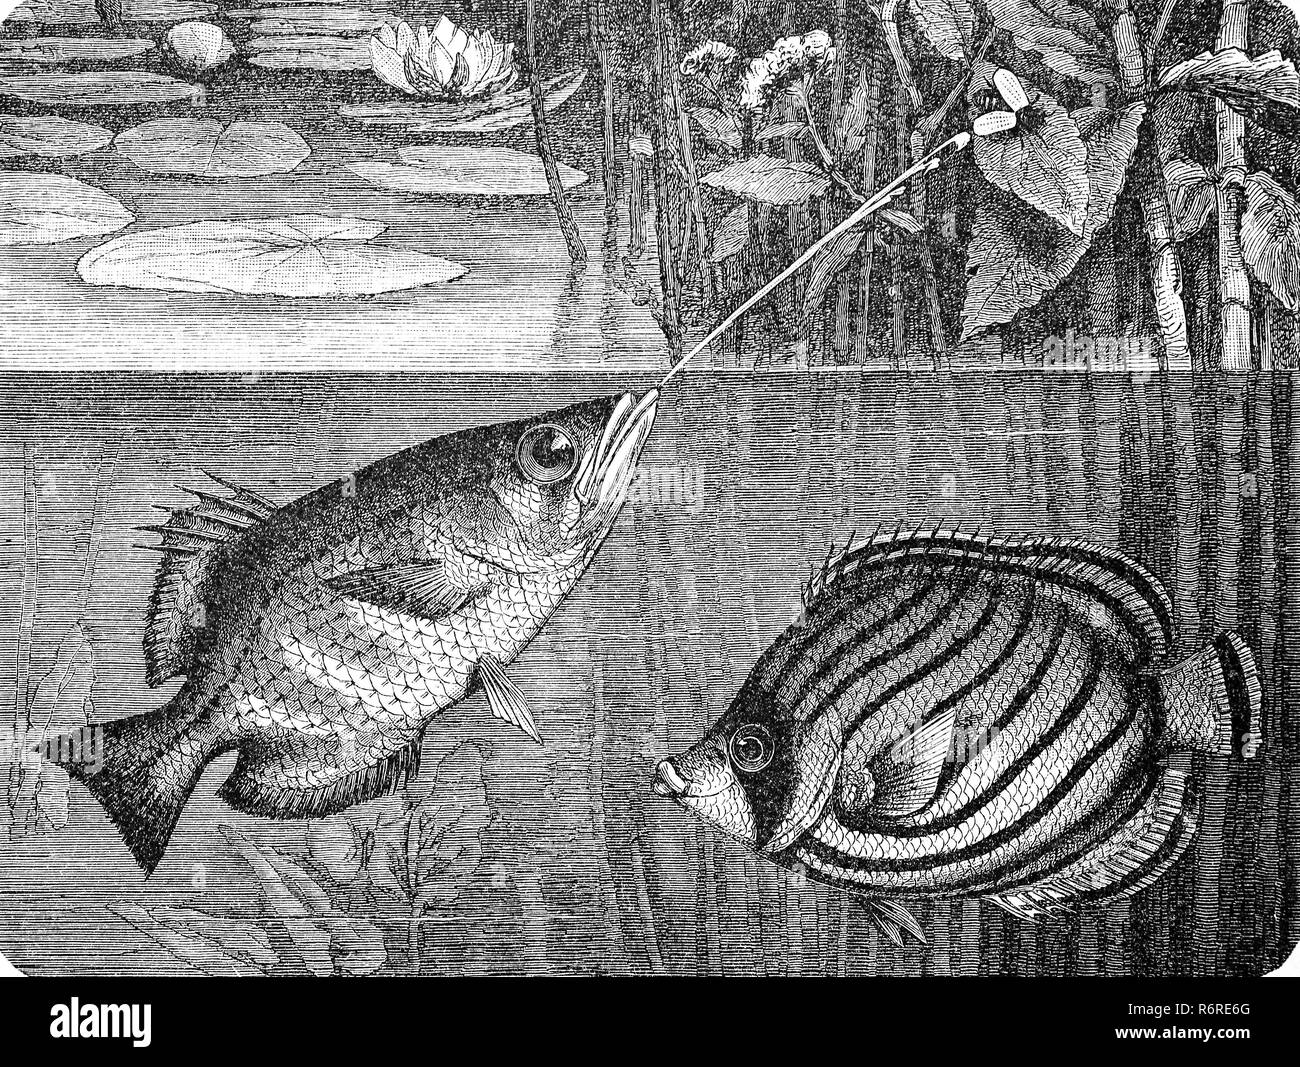 Digital improved reproduction, Banded archerfish and Scrawled Butterflyfish, SchÃ¼tze, Toxotes jaculator und Korallenfisch, Chaetodon meyeri, original print from the 19th century Stock Photo